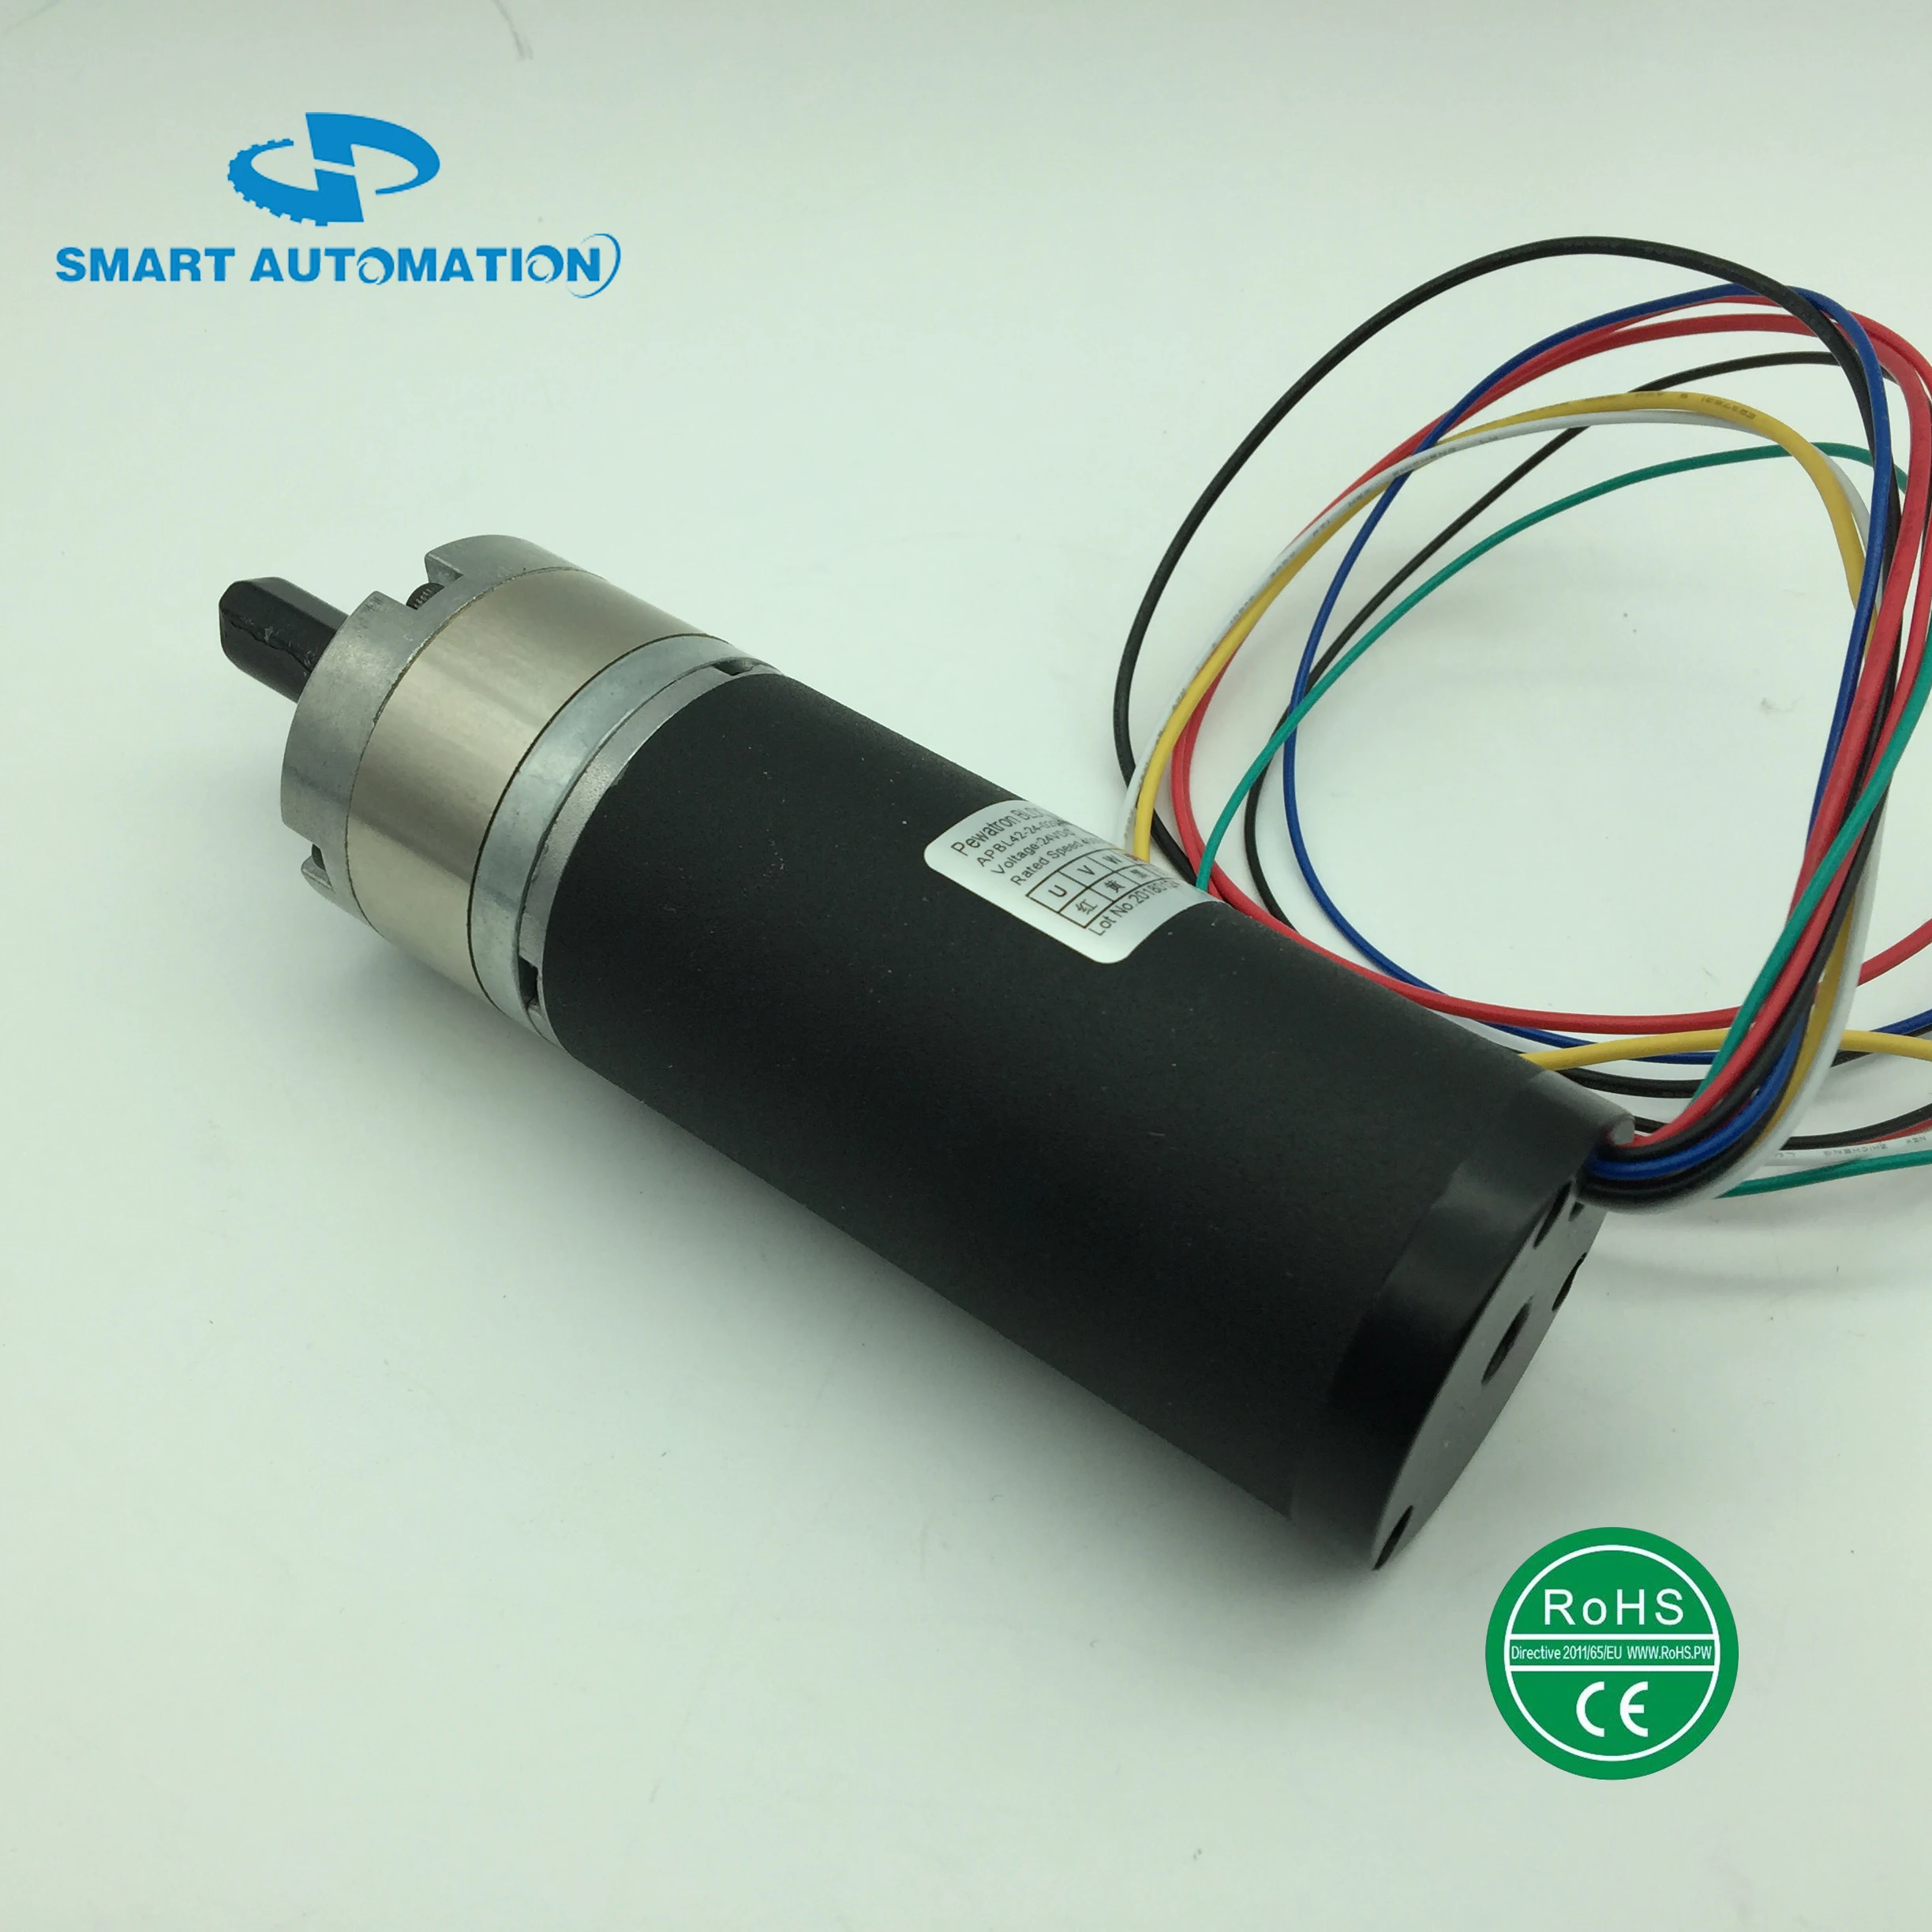 42RBL 42mm Cylindrical Body Dc Brushless Motor, OPTION BLDC with Gearhead Brake Encoder Assembled, Driver/Controller Integrated